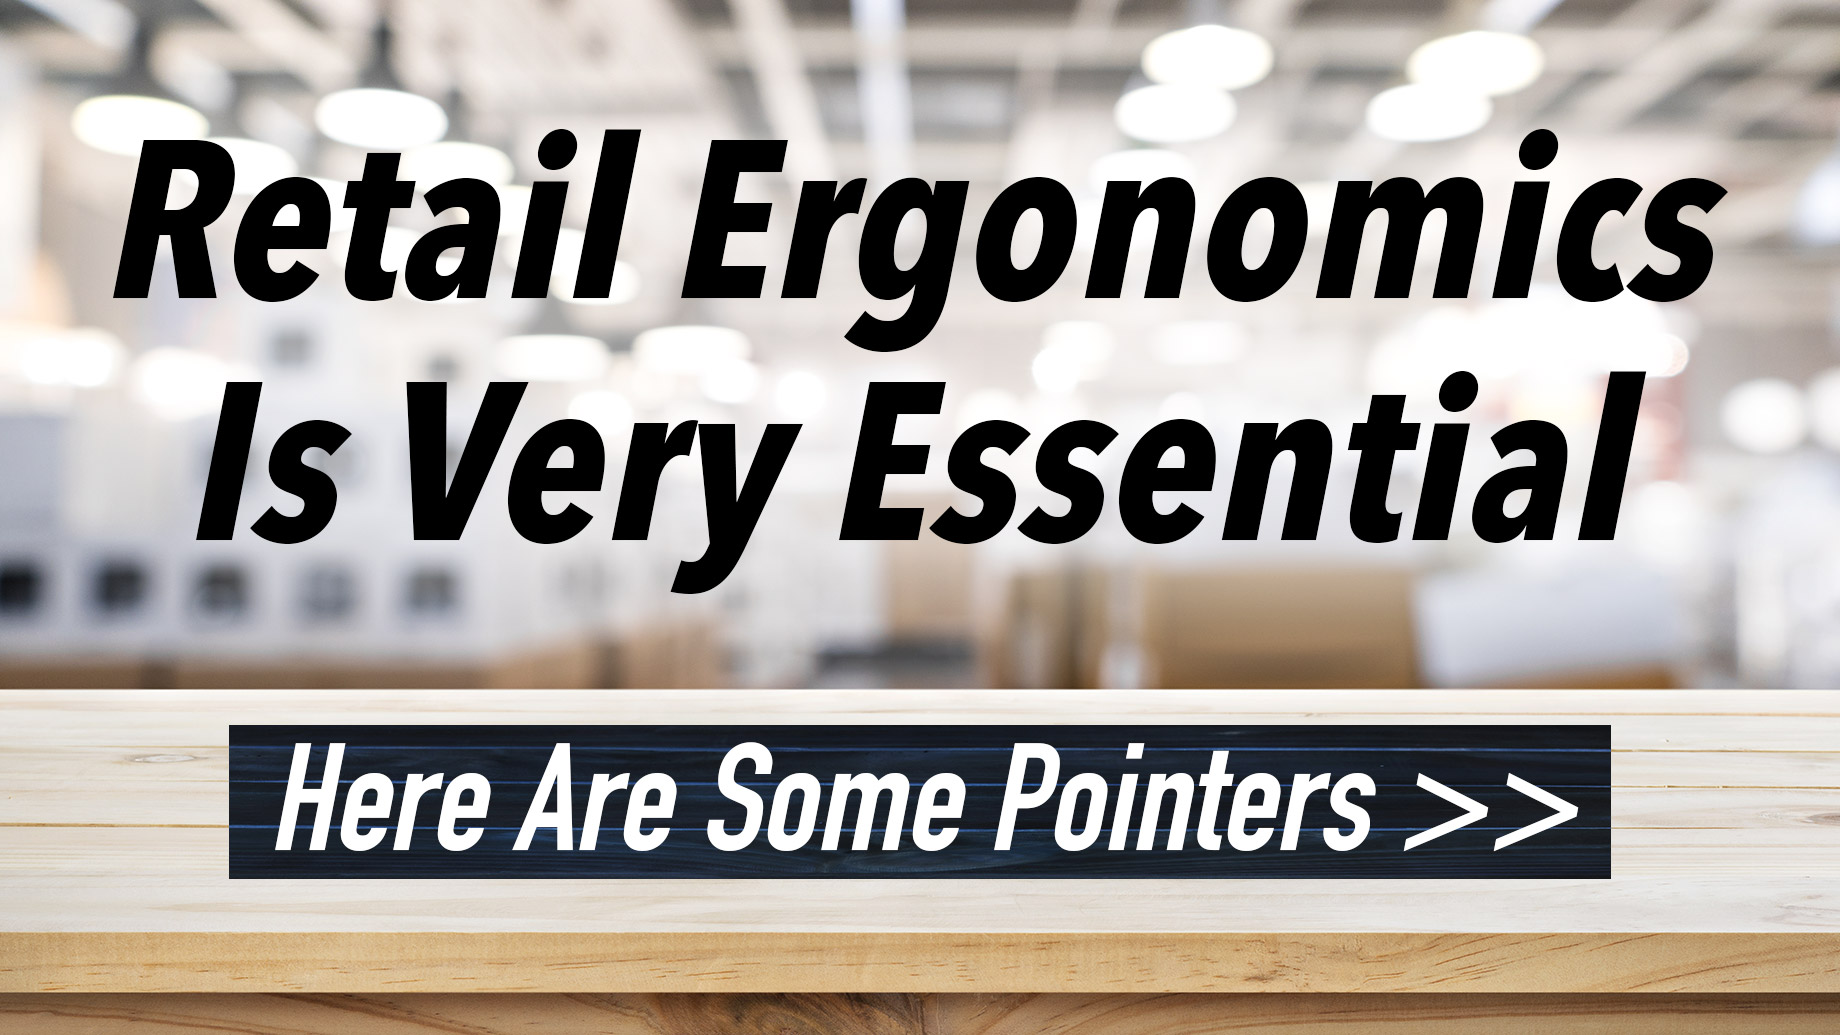 Retail Ergonomics Is Very Essential - Here Are Some Pointers